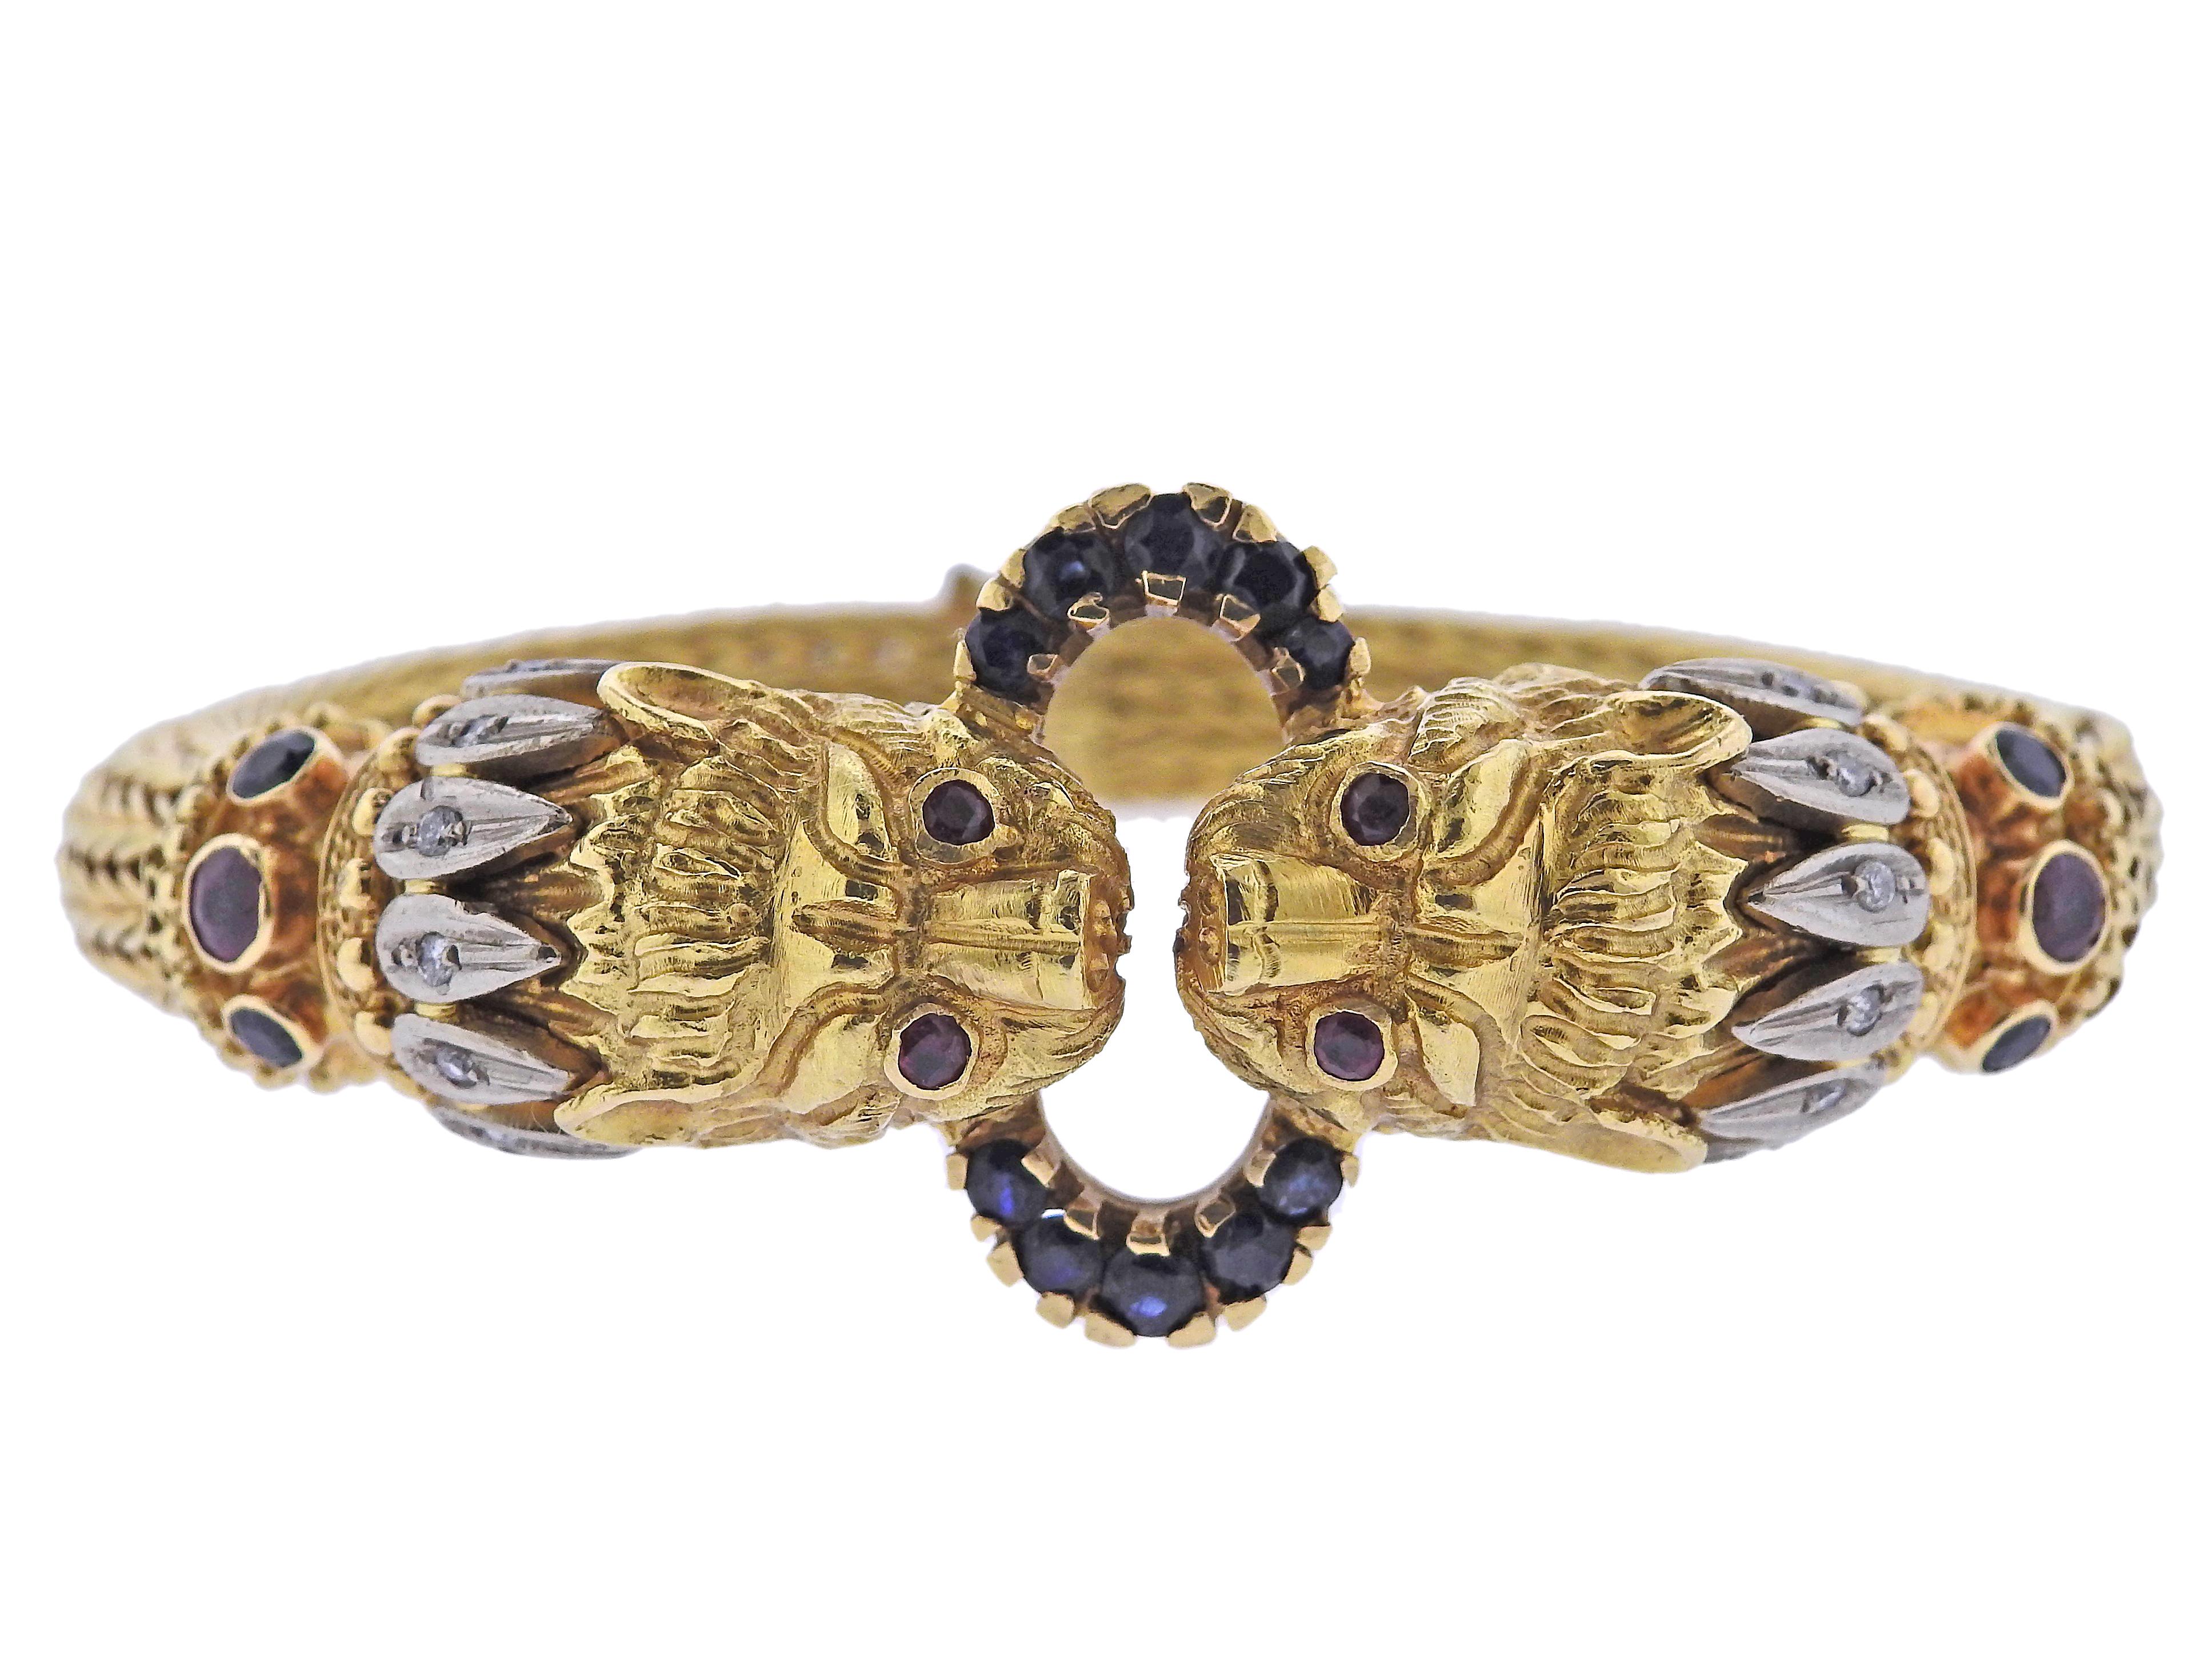 Classic Chimera 18k gold bracelet by Greek designer Ilias Lalaounis, adorned with approx. 0.08ctw H/VS diamonds, rubies and sapphires. Bracelet will fit approx. 7-7.25